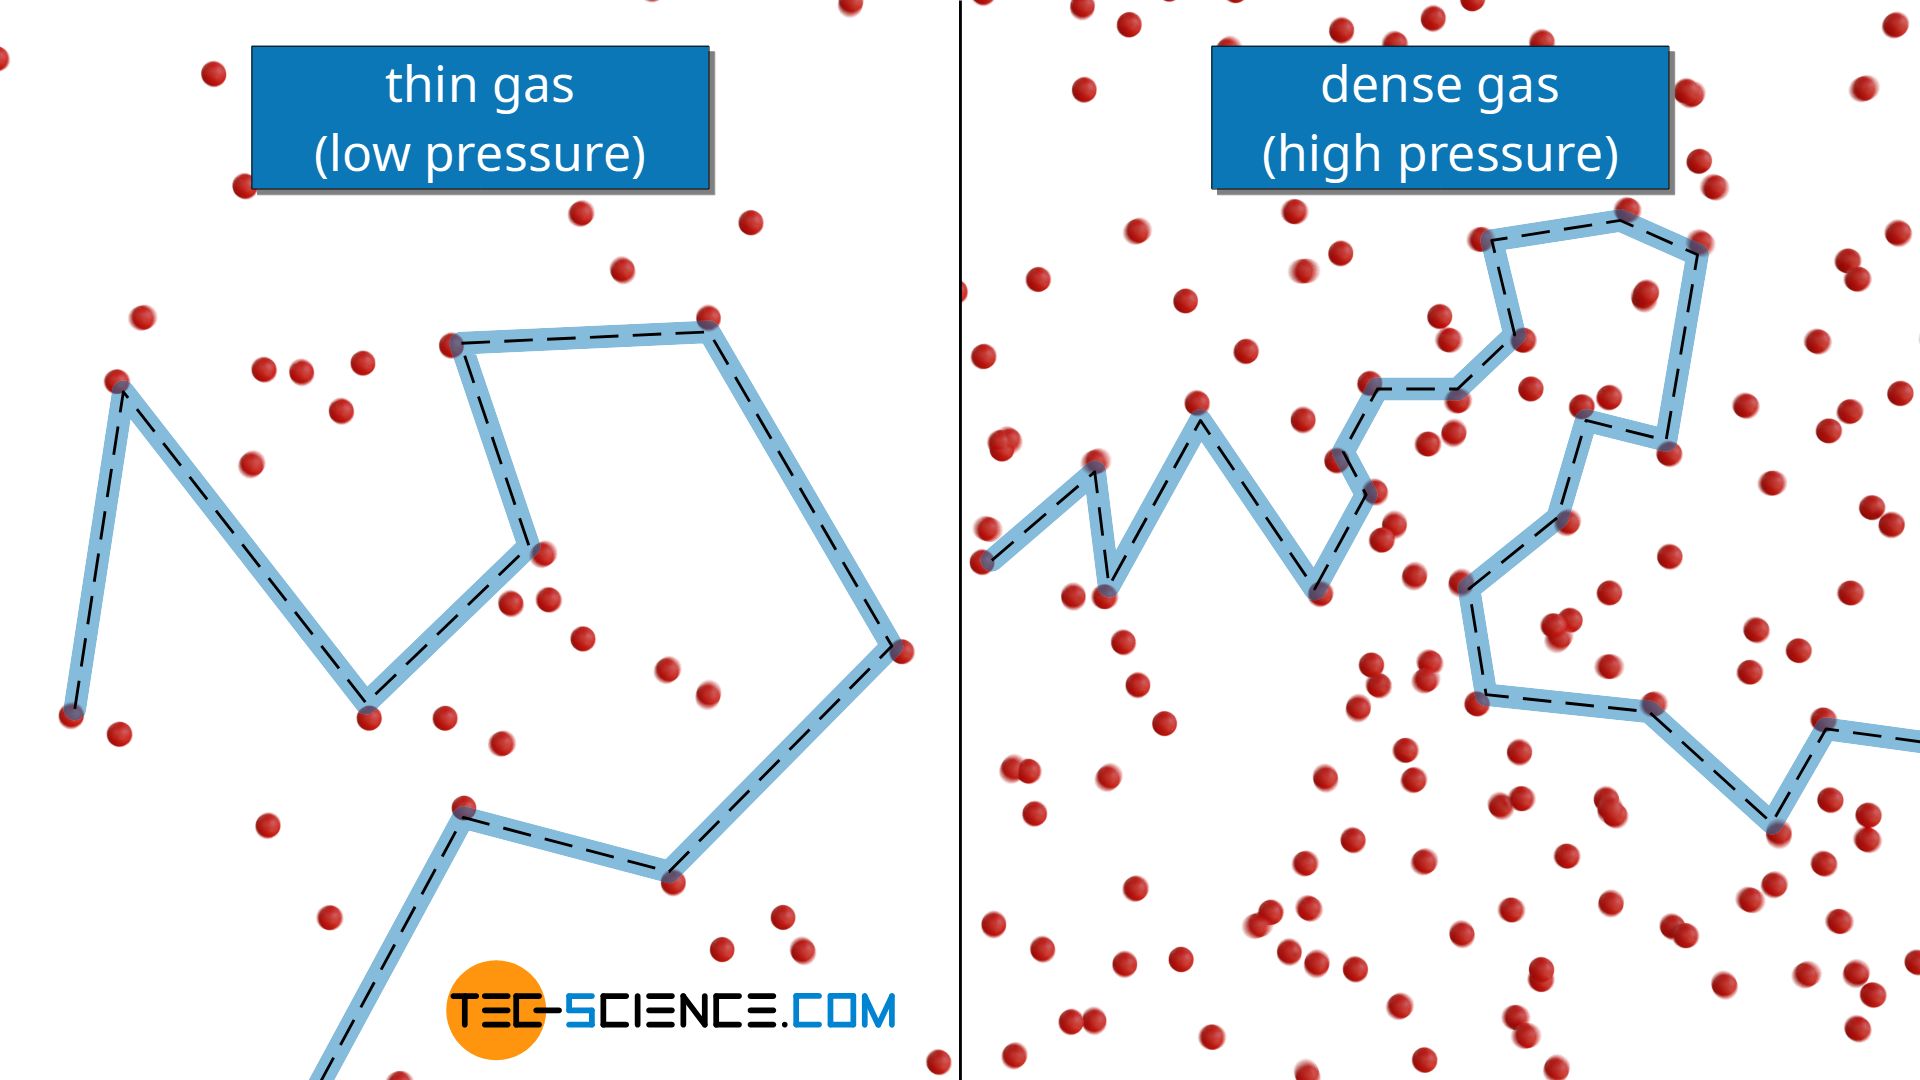 Mean free path and mean speed of molecules in a gas